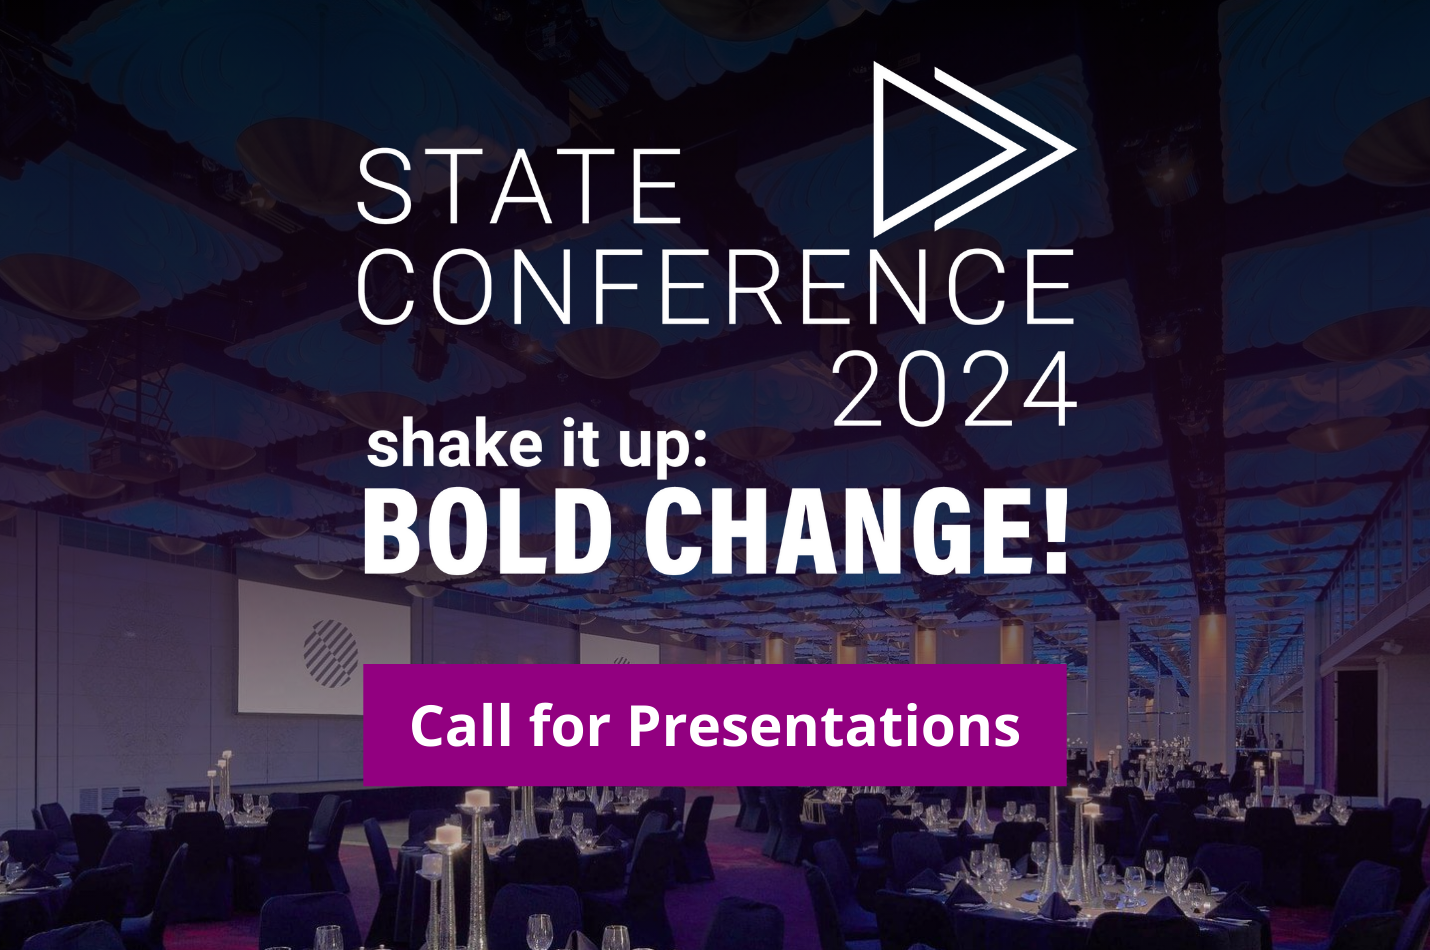 State Conference 2024 - Shake it up: Bold Change! Call for Presentations